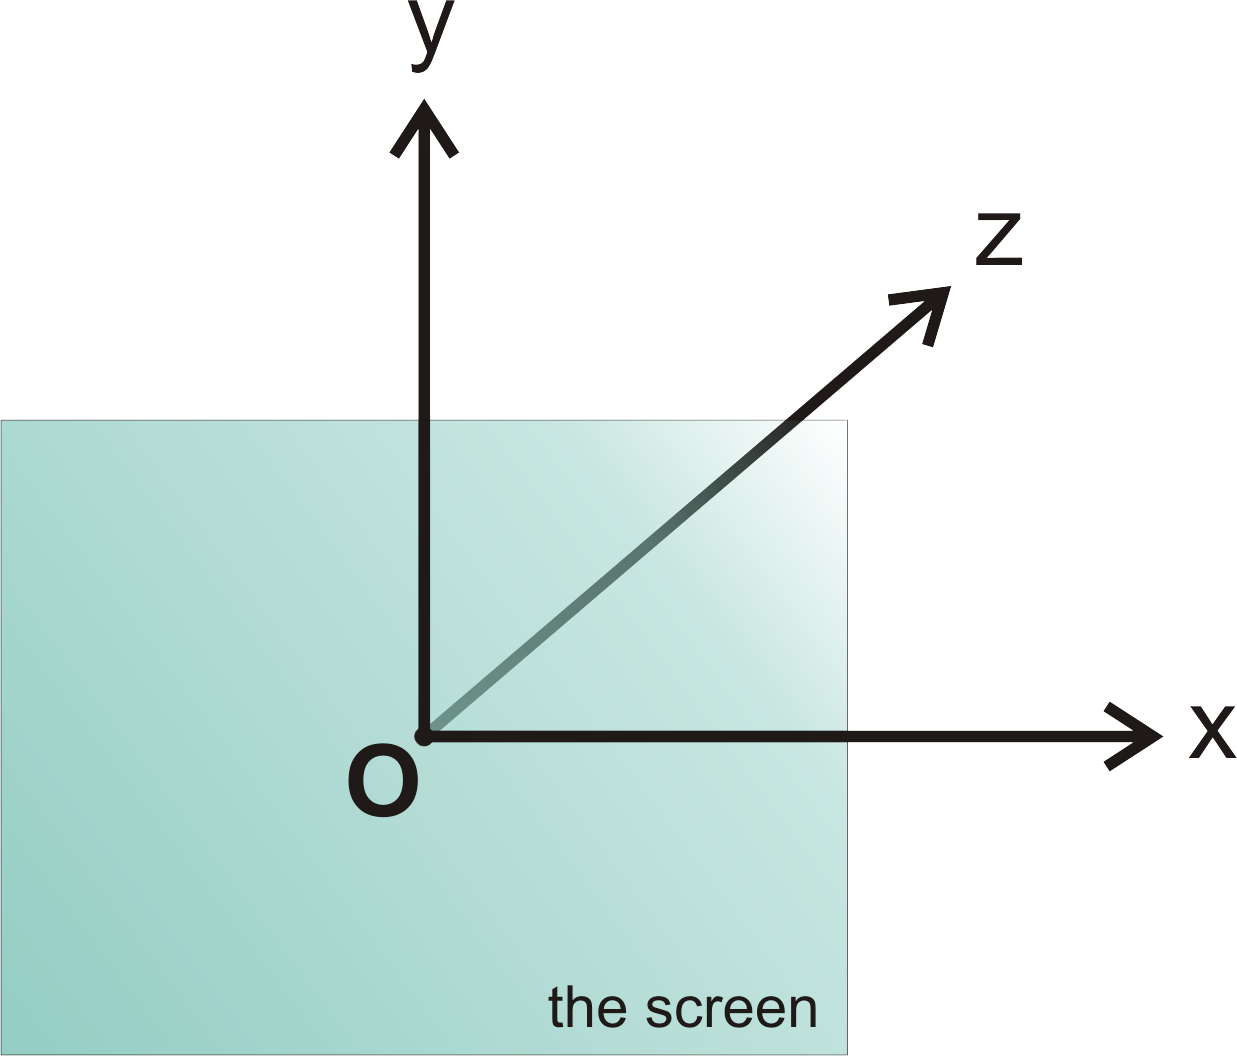 the coordinate system and the start position of the screen